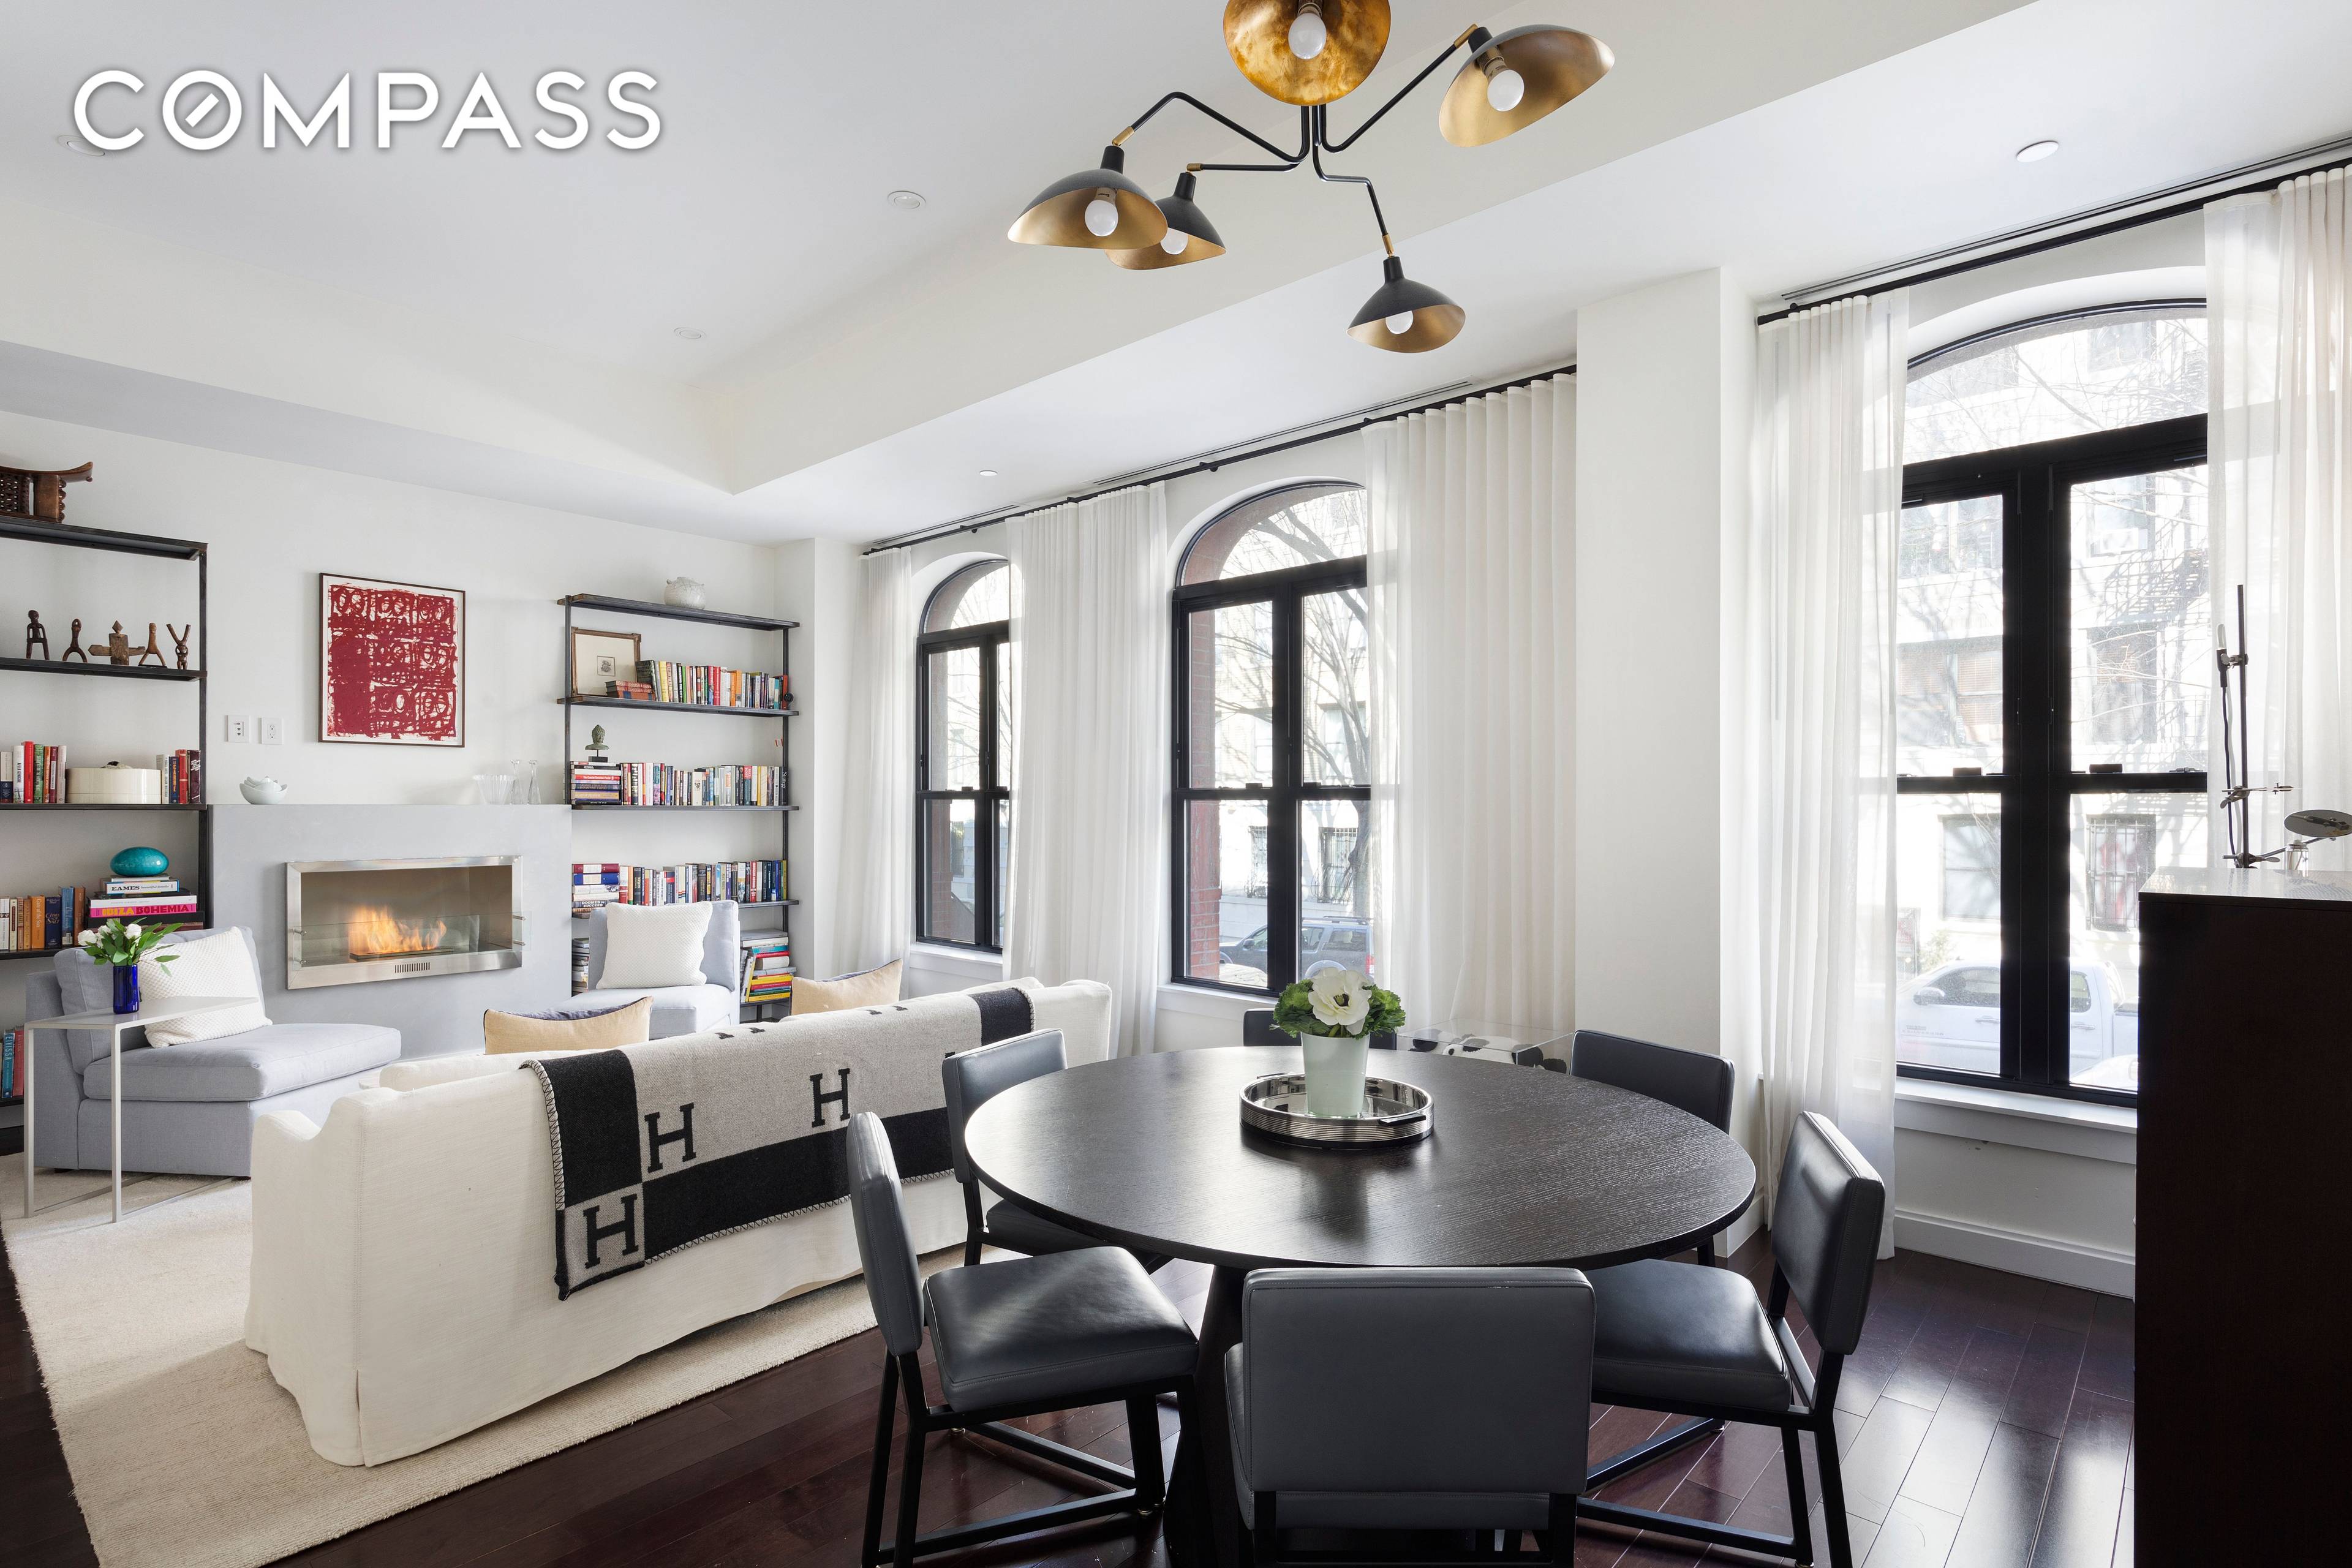 Welcome to 320 West 115th Street, where a private elevator opens up to a full floor, 4 bedroom, 3 bathroom that spans nearly 2, 000 square feet.